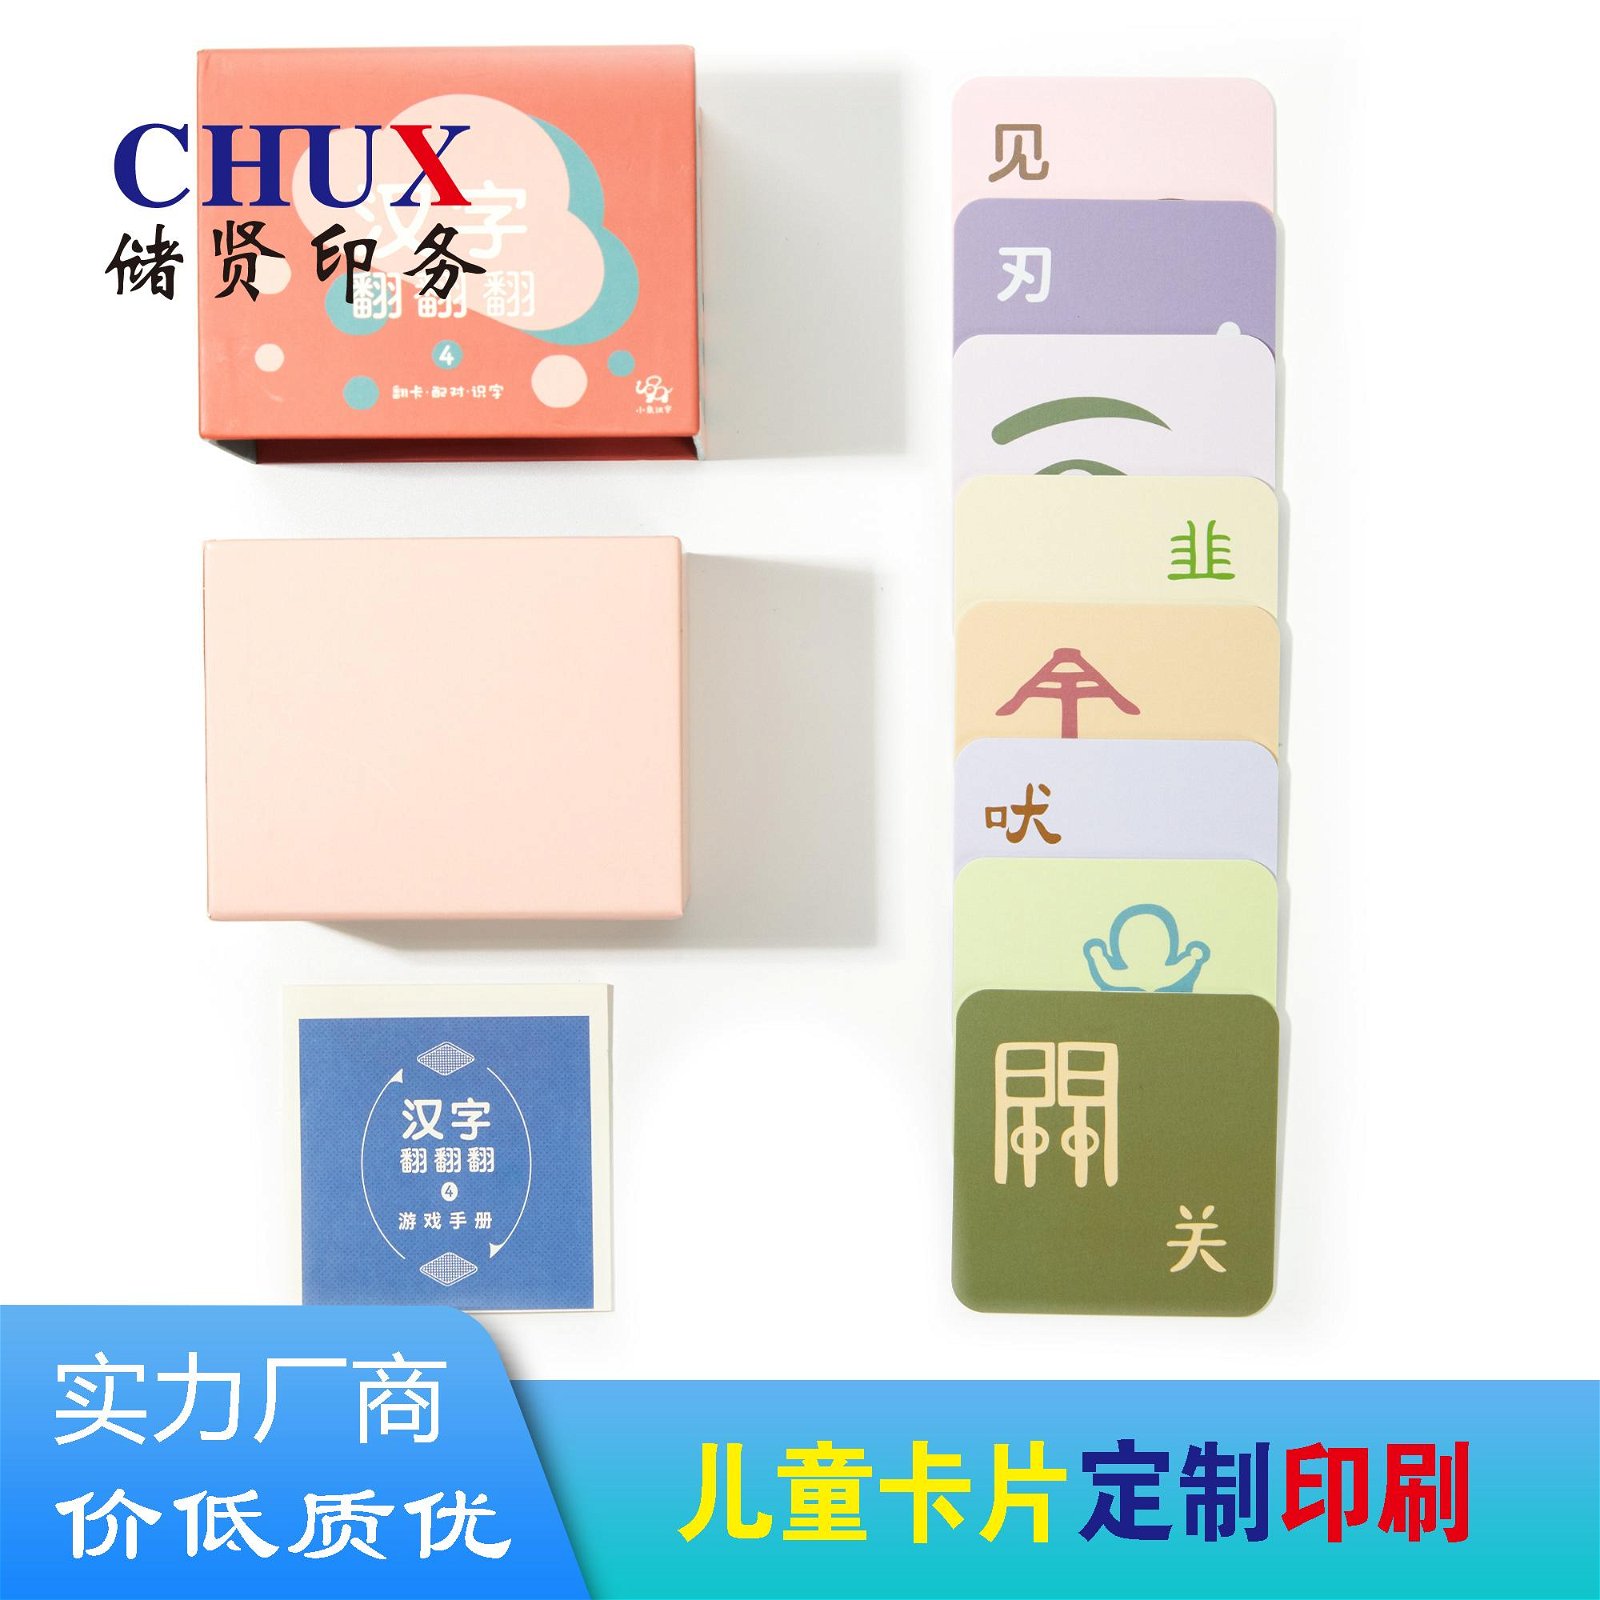 Card printing special-shaped card literacy card printing 3